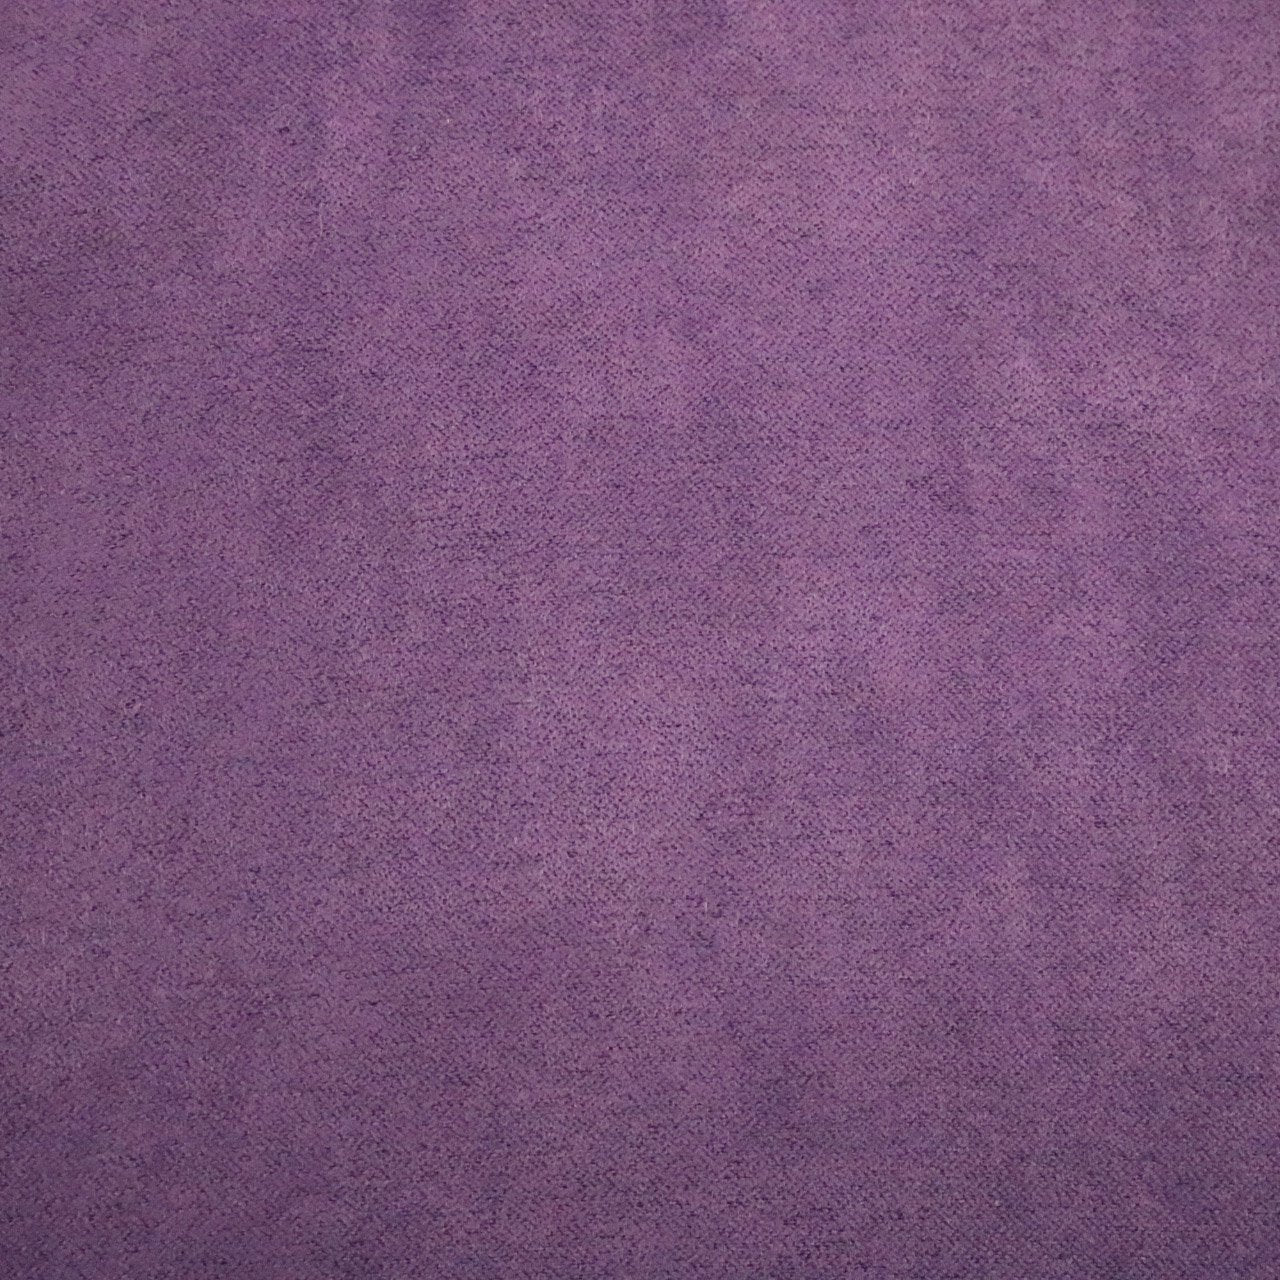 LV Purple Suede Fabric, Purple Louis Vuitton Fabric with Suede Surface